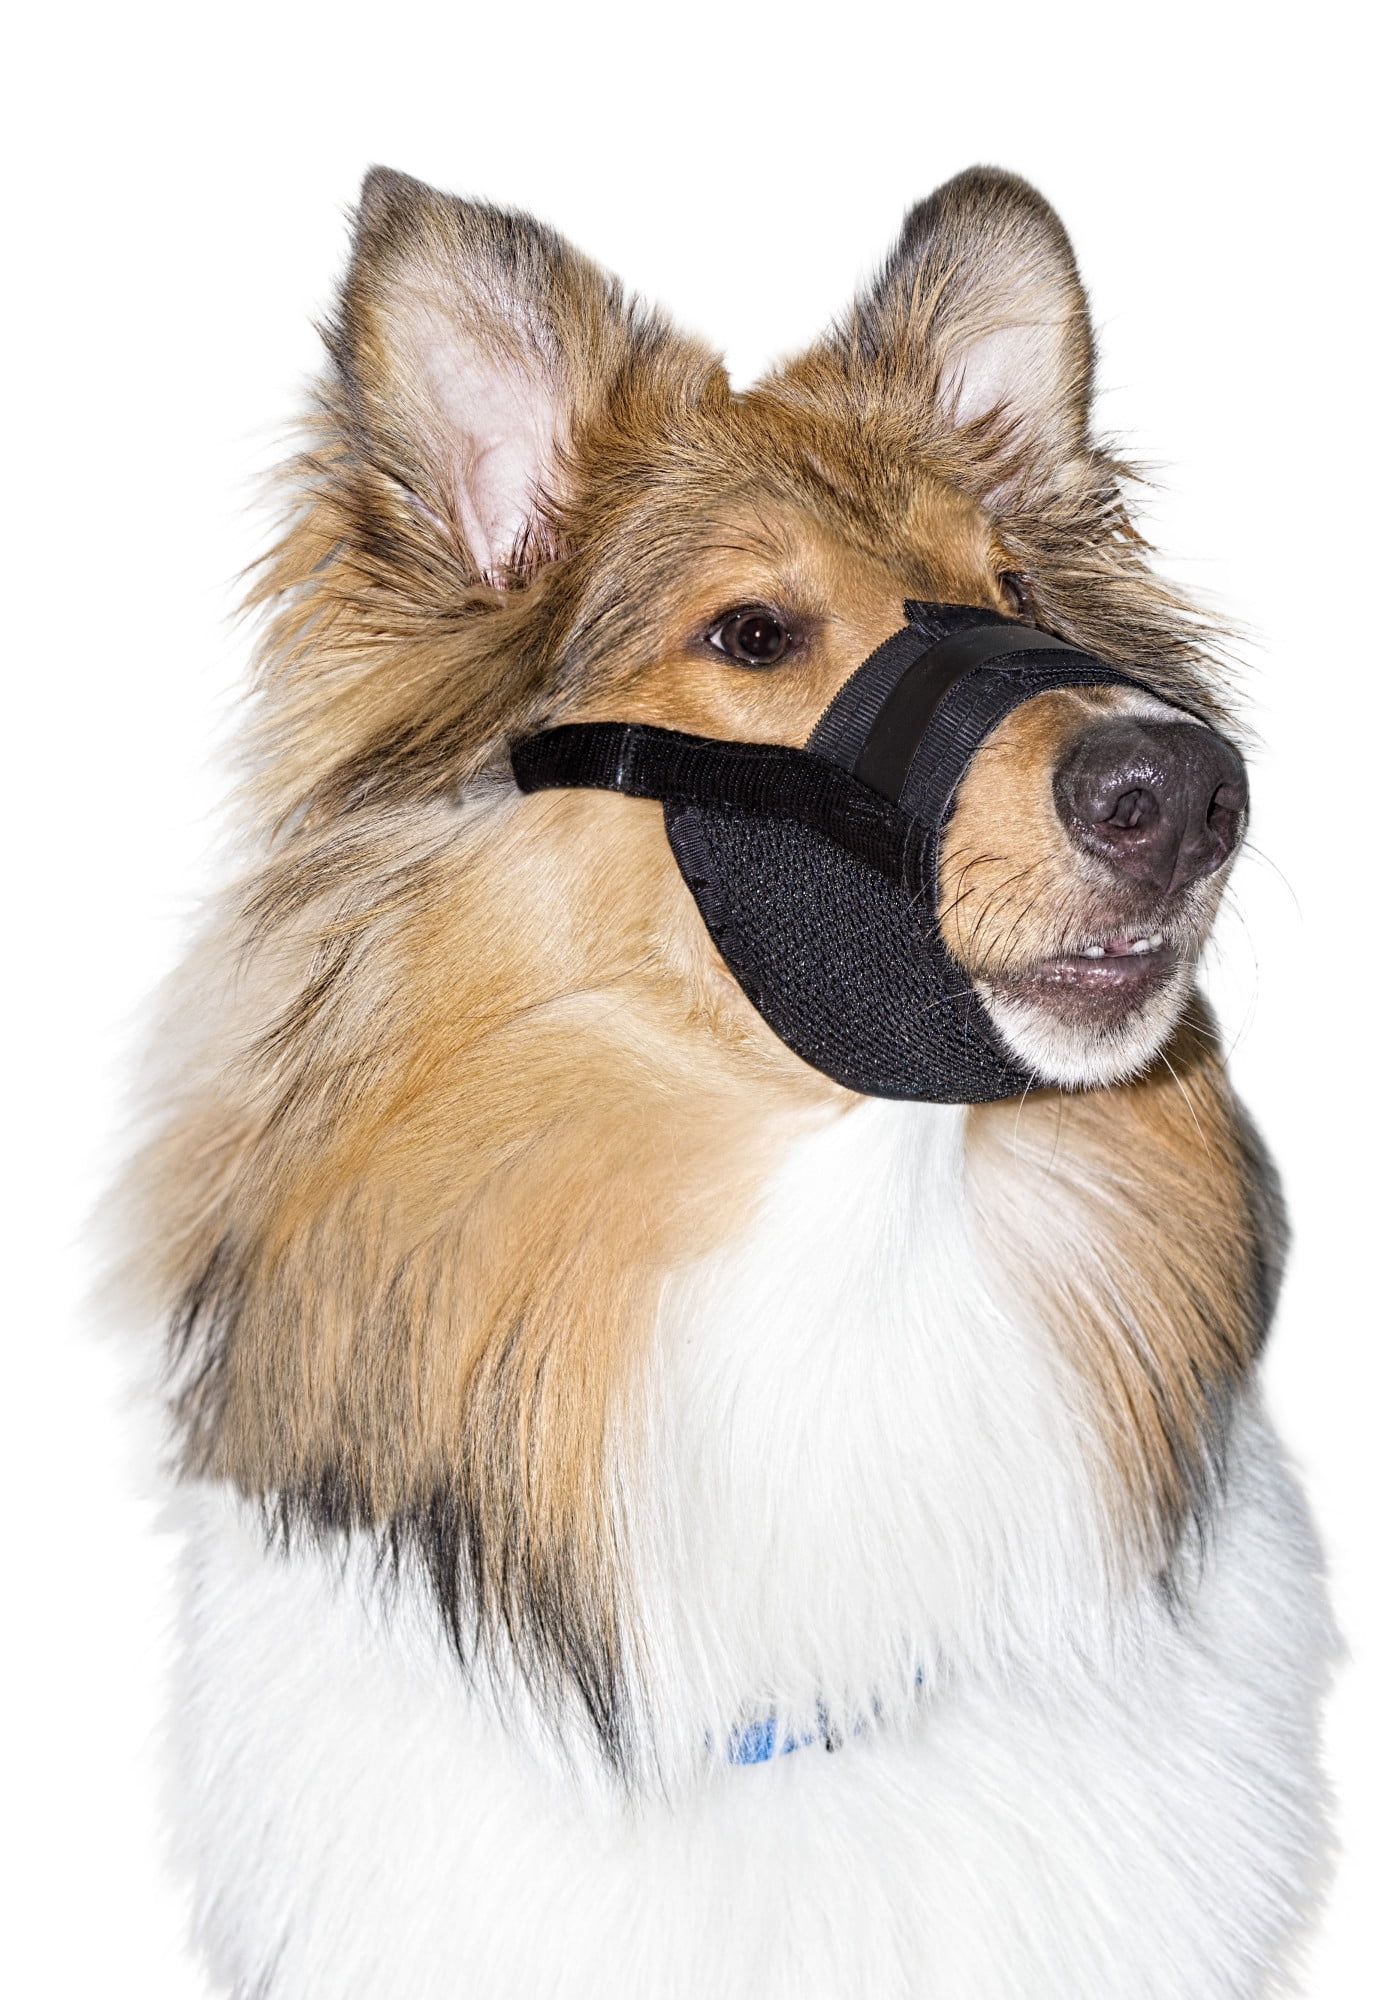 Premier Pet Dog Muzzle for Large Dogs - Padded Nylon for Safe, Comfortable Fit